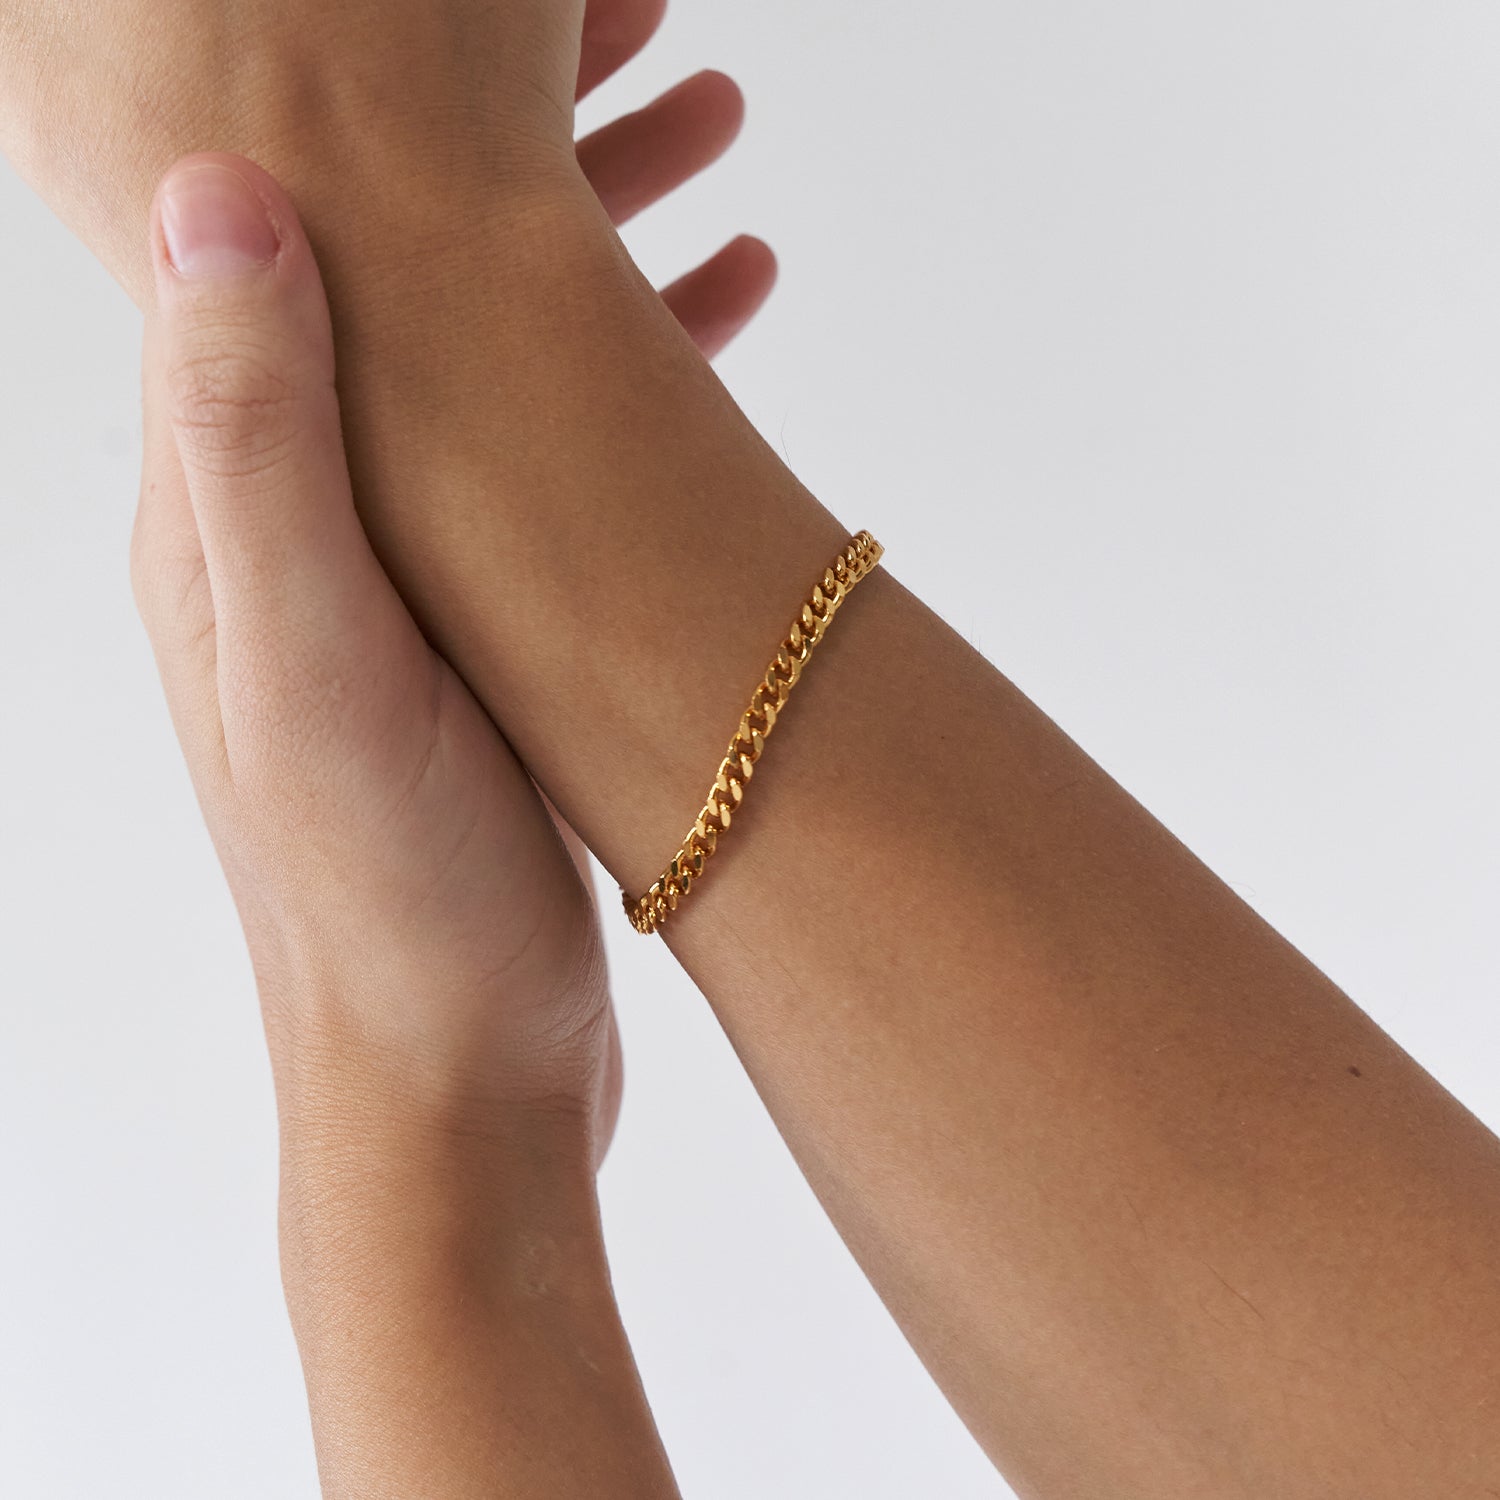 curb chain bracelet made in 18k gold plated brass